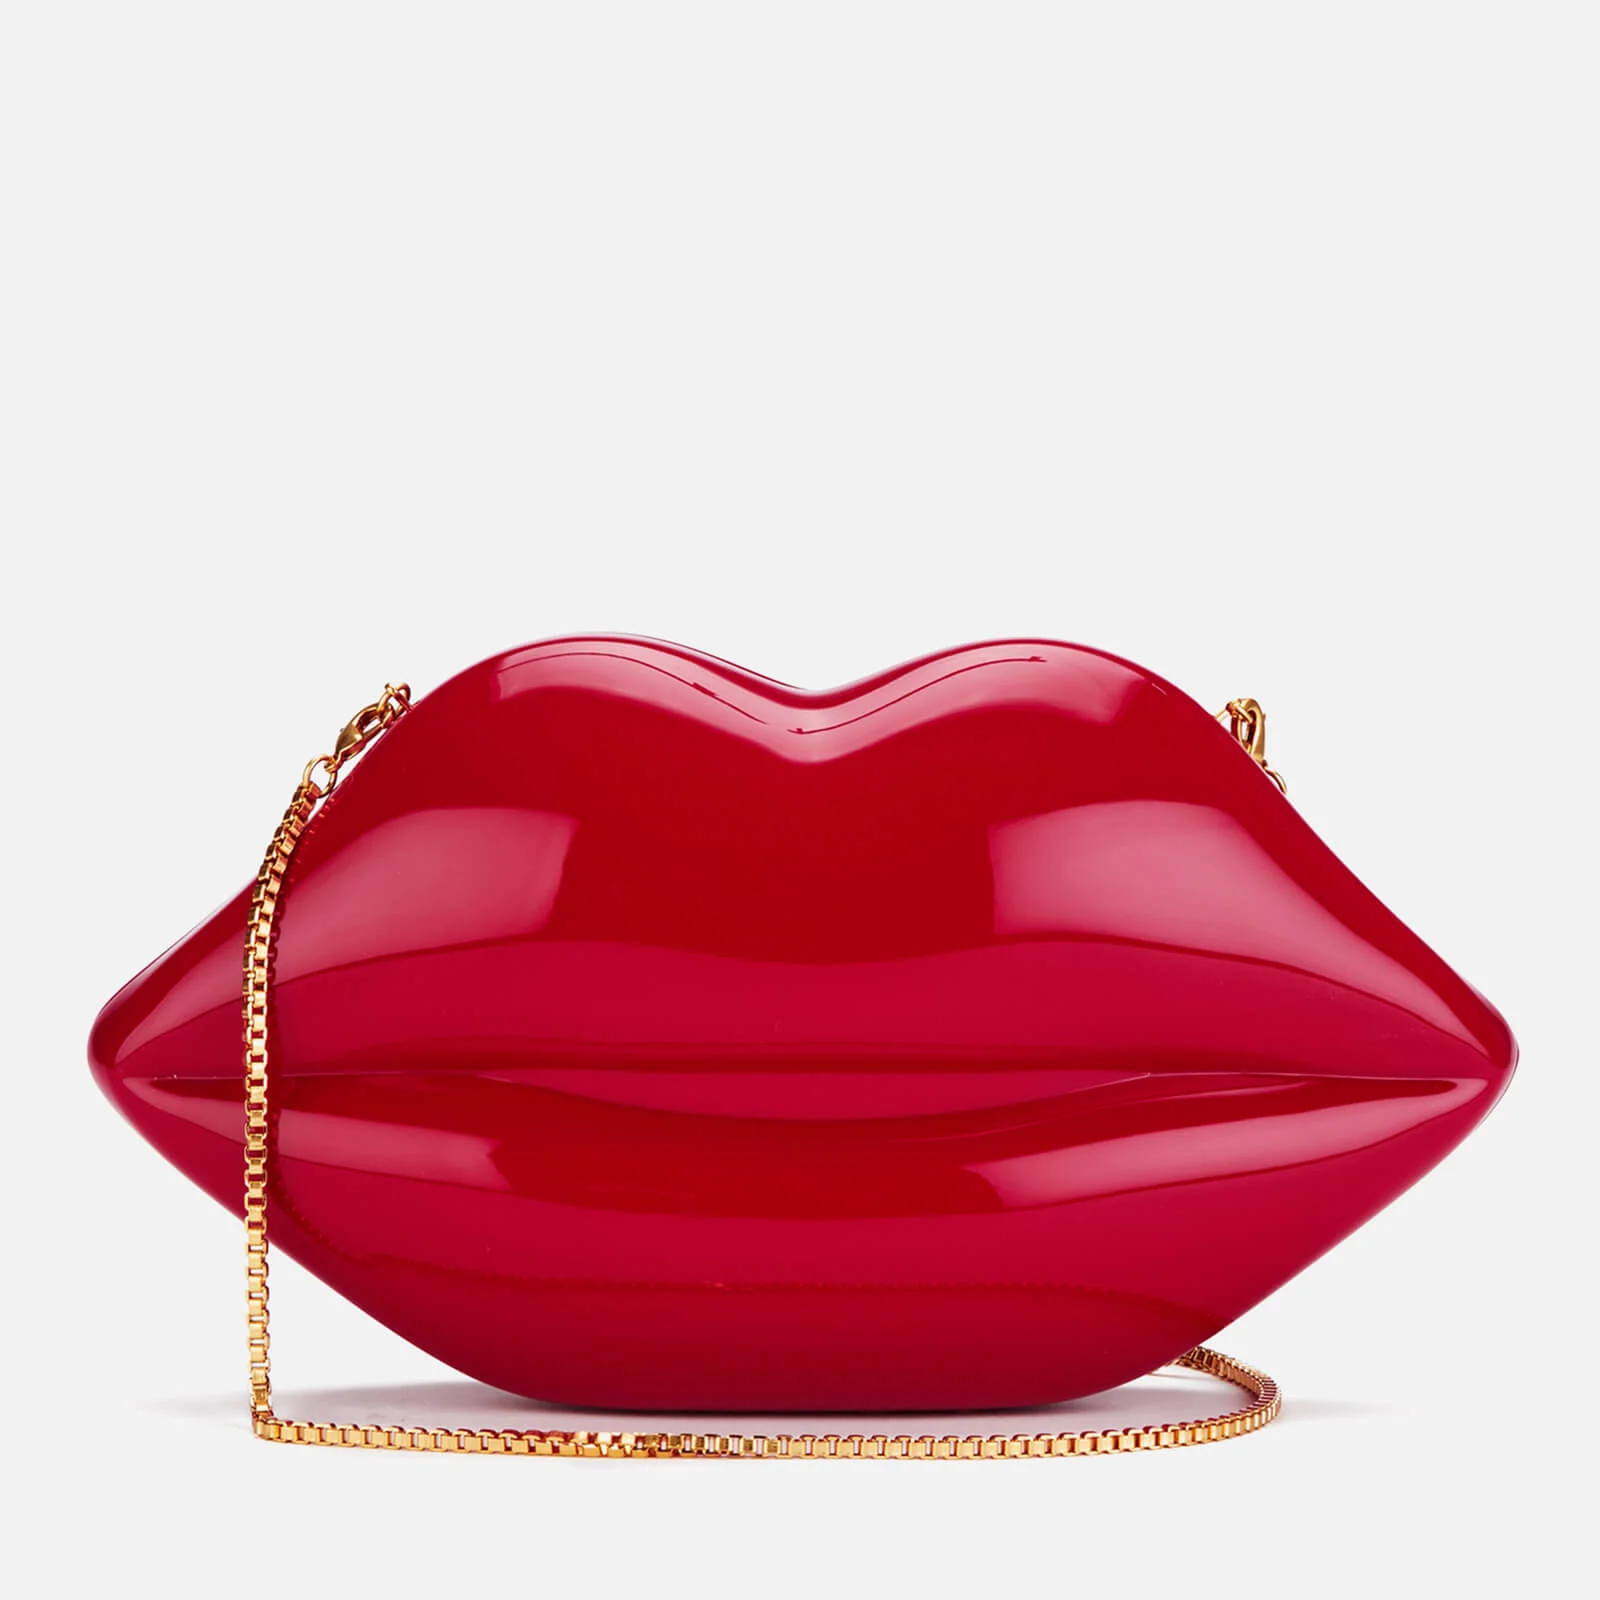 Lulu Guinness Women's Large Perspex Lips Clutch Bag - Red Image 1